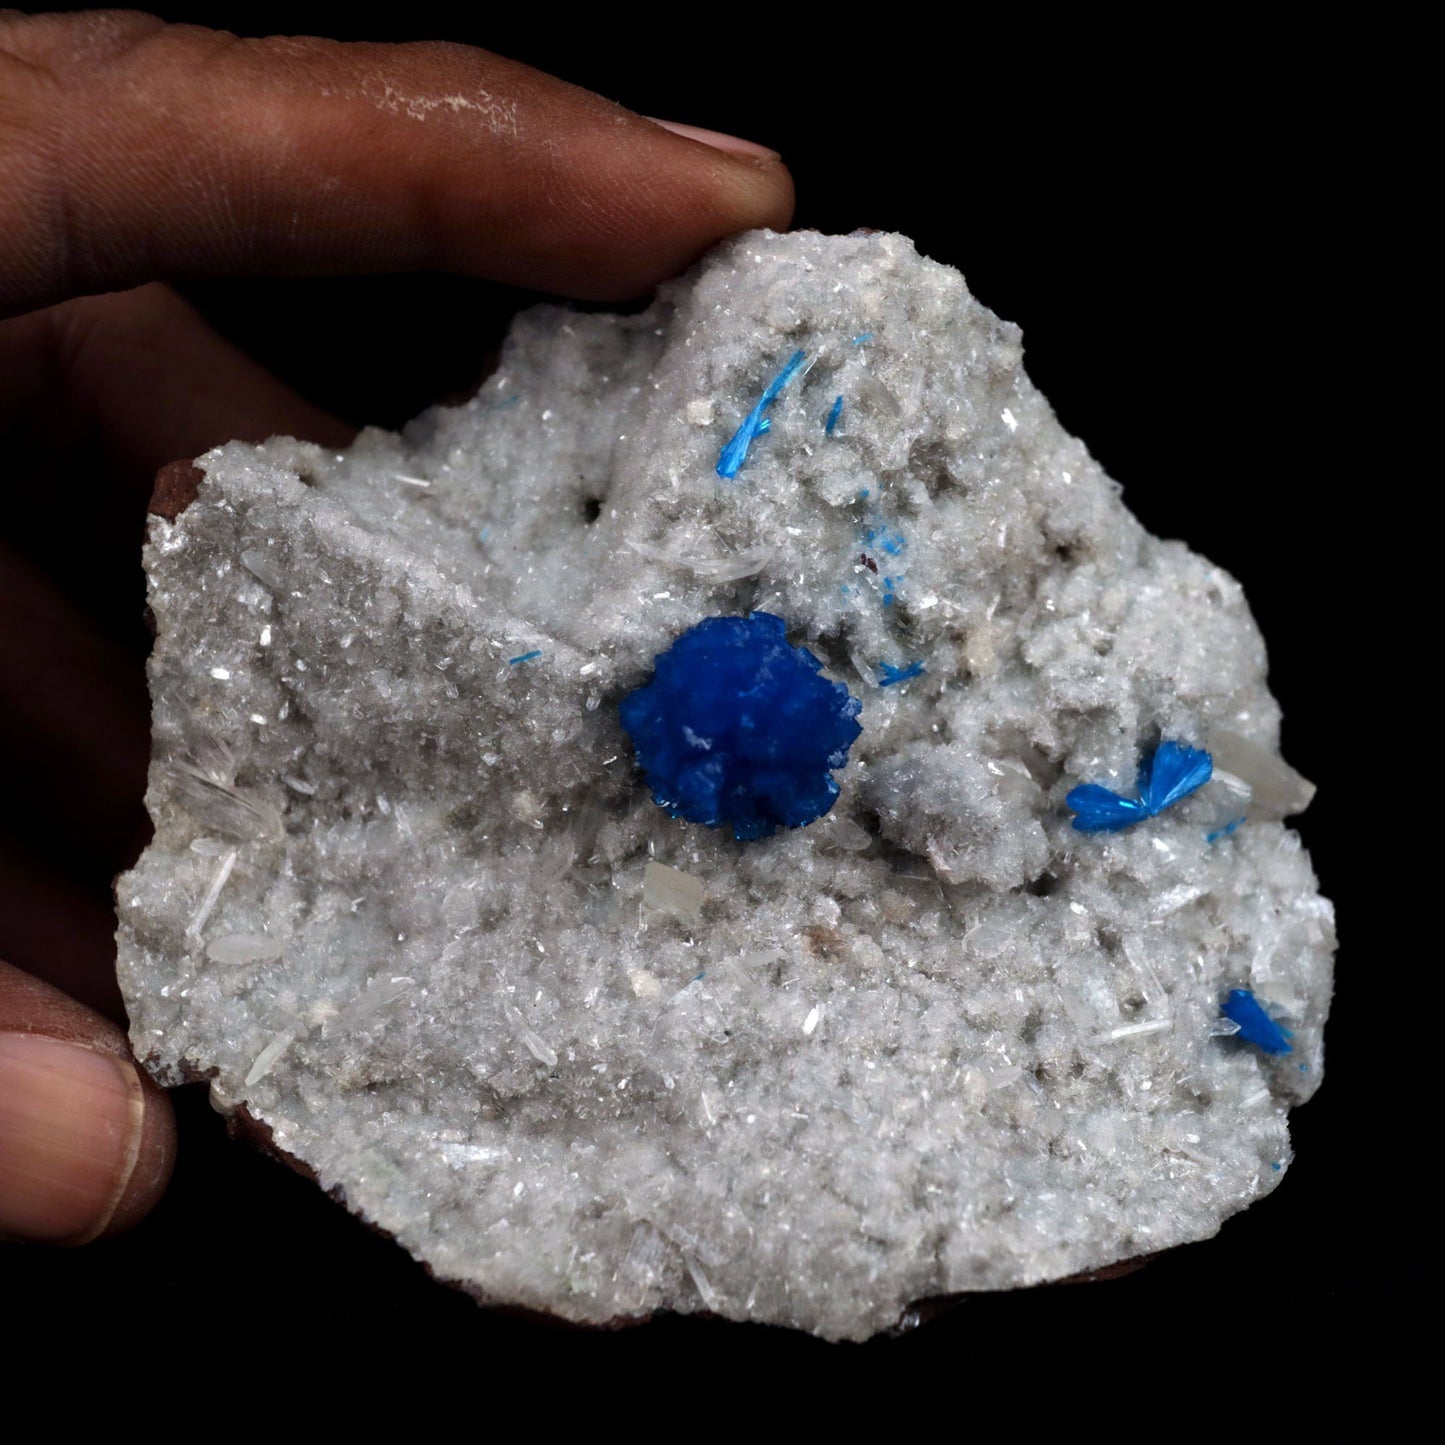 Cavansite Ball on Heuandite (Rare Find) Natural Mineral Specimen # B …  https://www.superbminerals.us/products/cavansite-ball-on-heuandite-rare-find-natural-mineral-specimen-b-4871  Features: Radial group of exquisite deep blue Cavansite on basalt with accompanying beige micro-crystals of Heulandite makes up this stunning work. There's no obvious damage, however the front of the Cavansite "balls" has a small separation mark where it grew up against the pocket wall. It's of excellent 